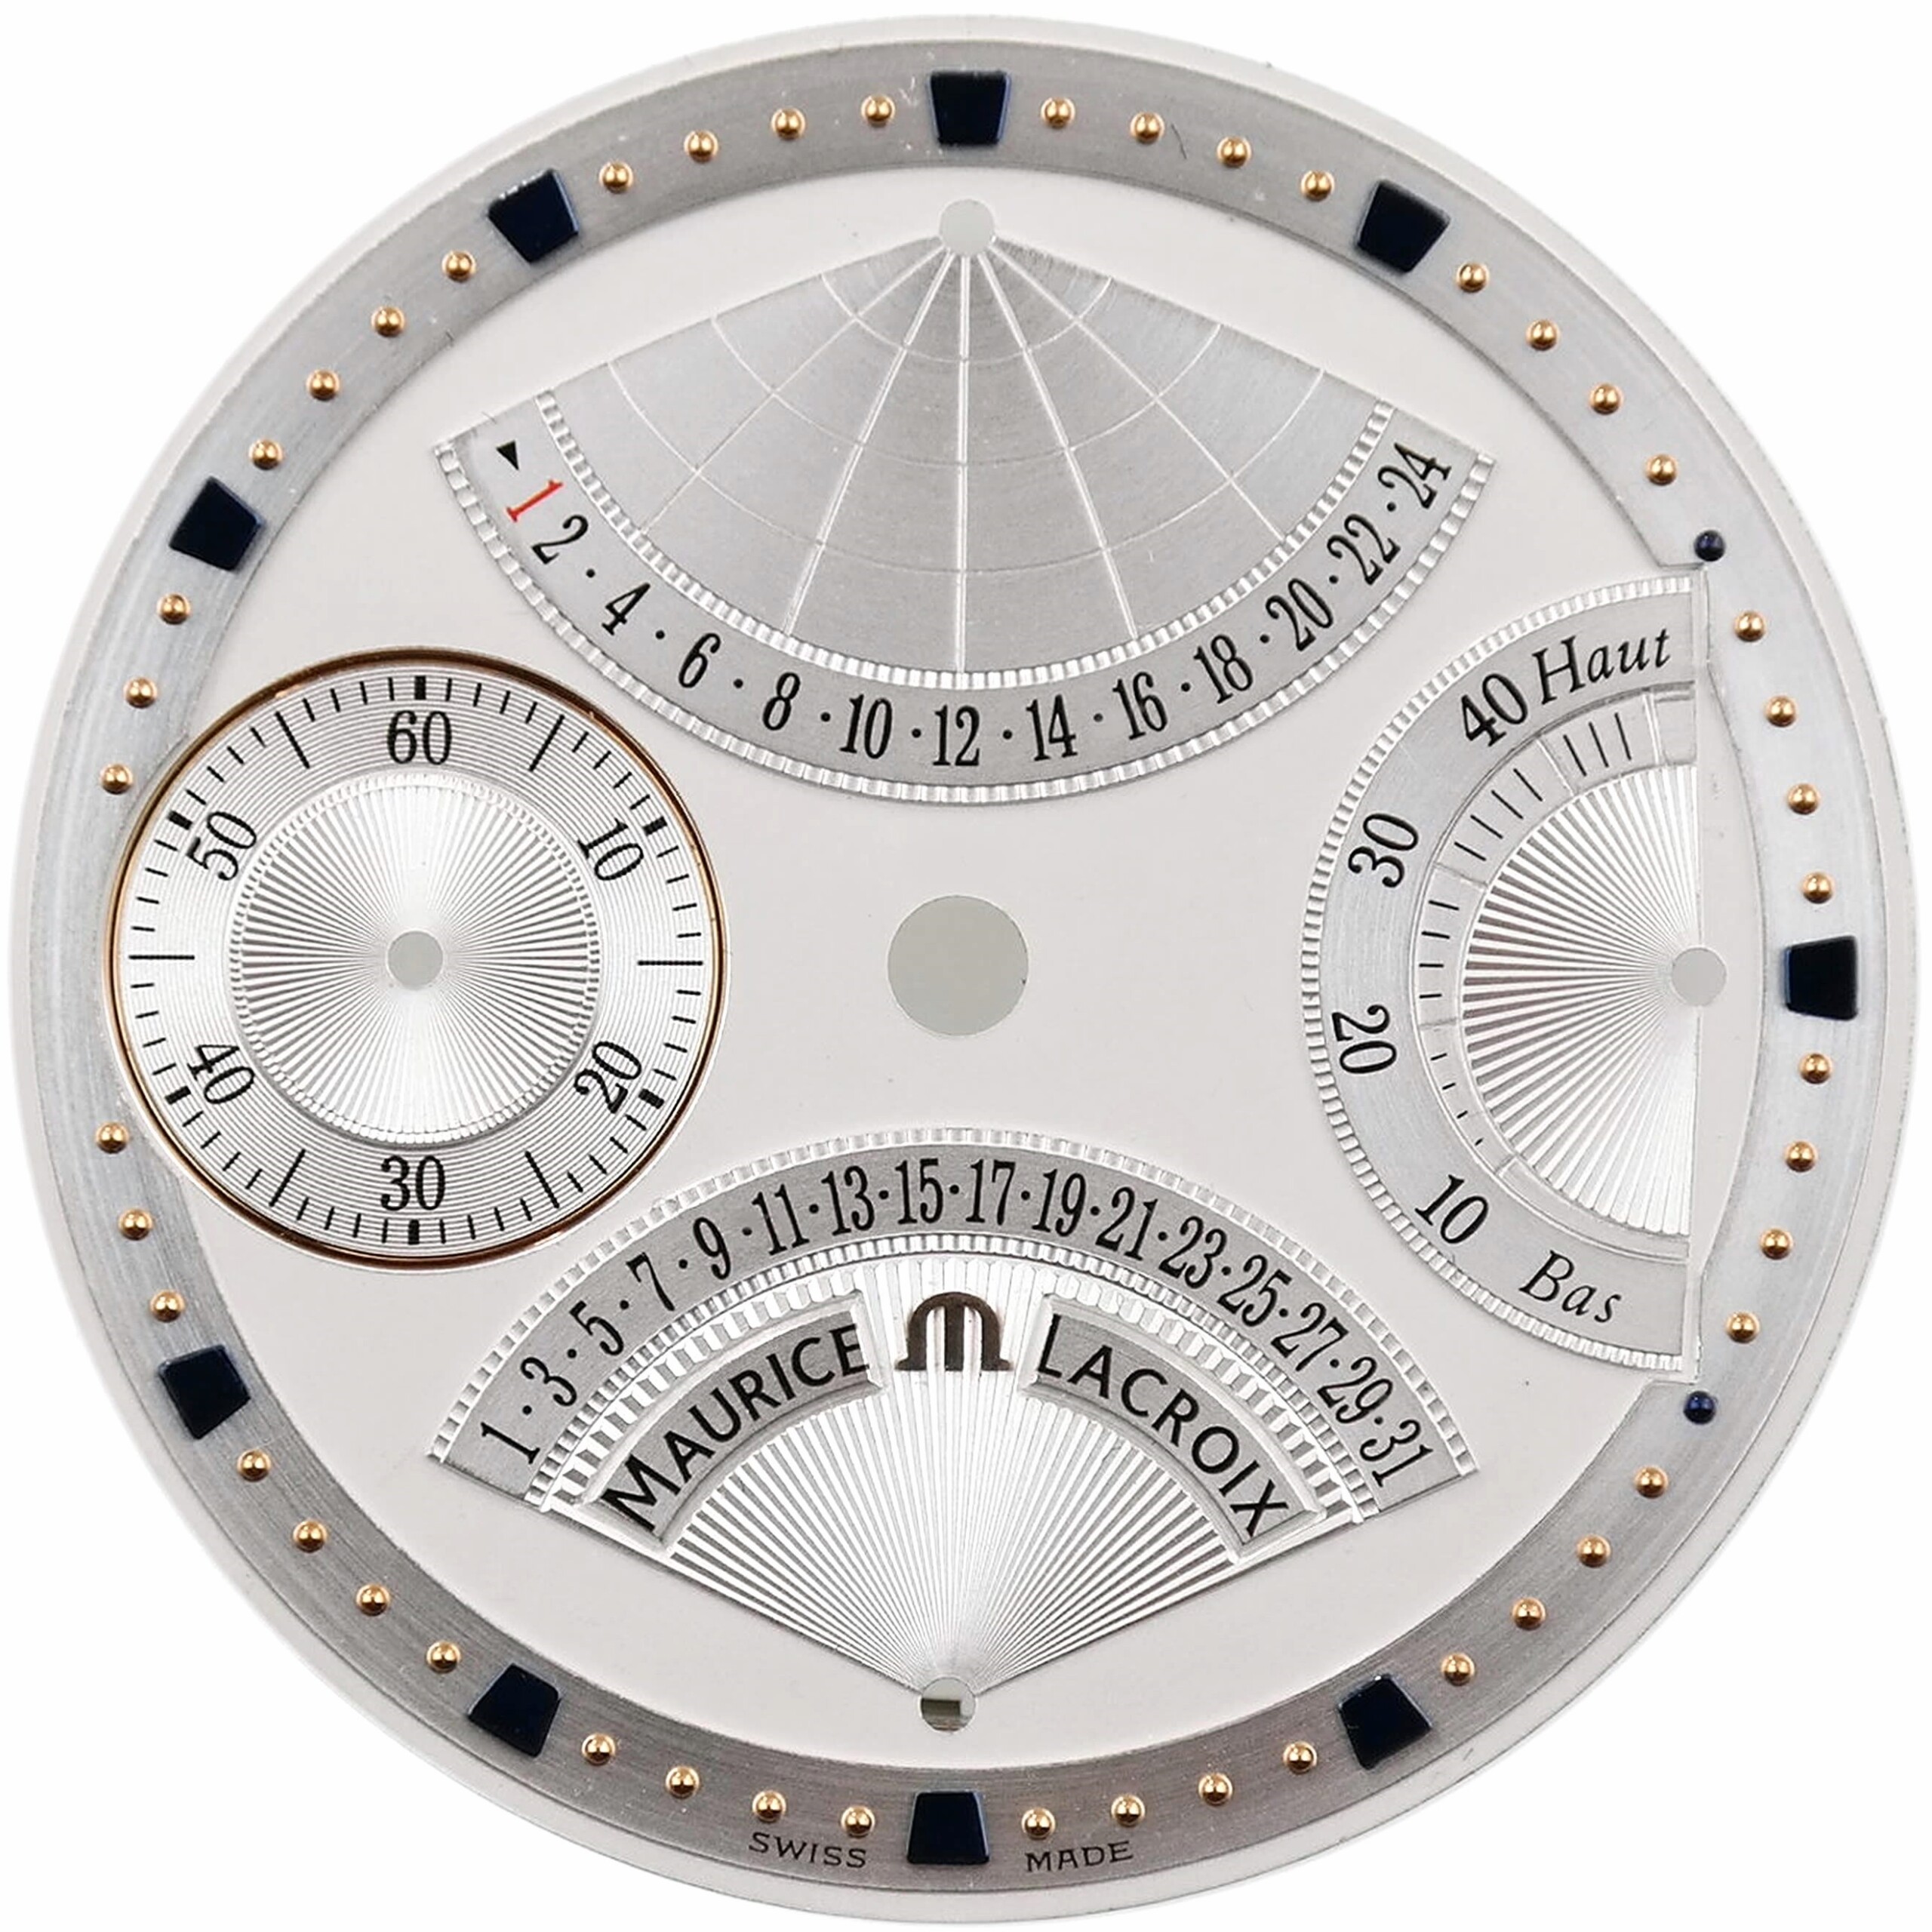 MAURICE LACROIX - Masterpiece Double Retrograde - MP7018 - Watch Dial